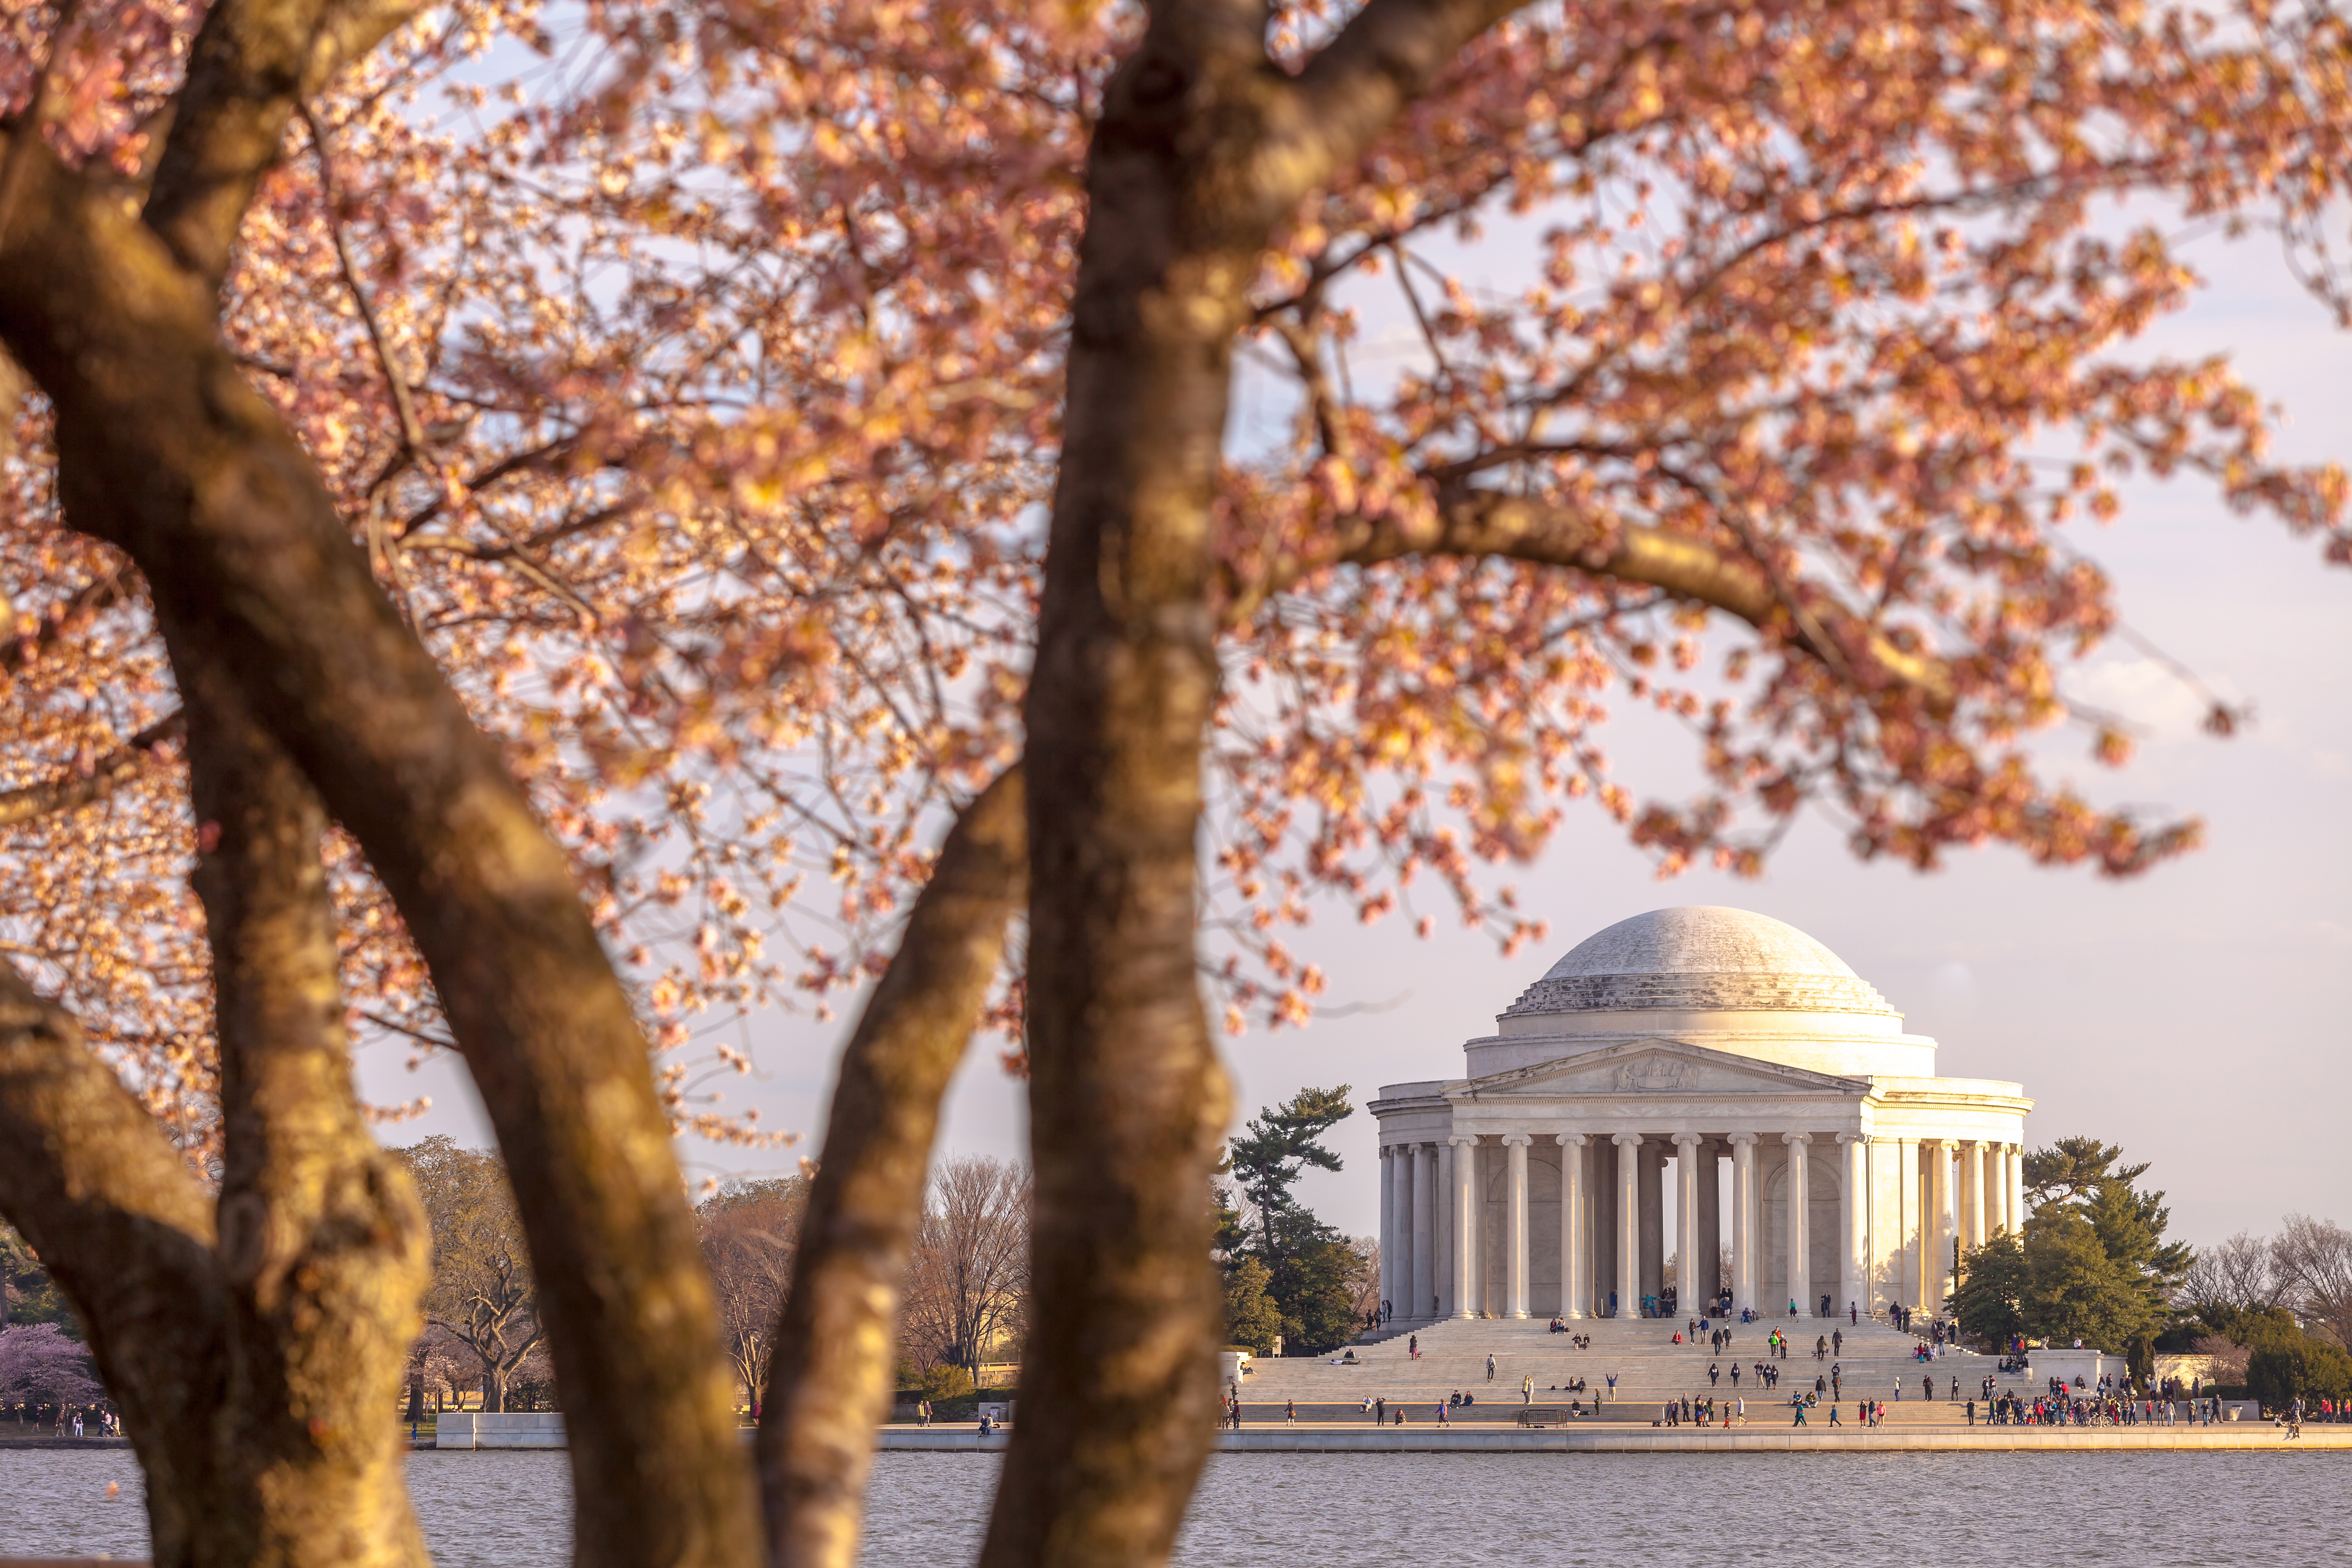 Cherry blossoms with the Thomas Jefferson Memorial in the background in Washington, D.C.